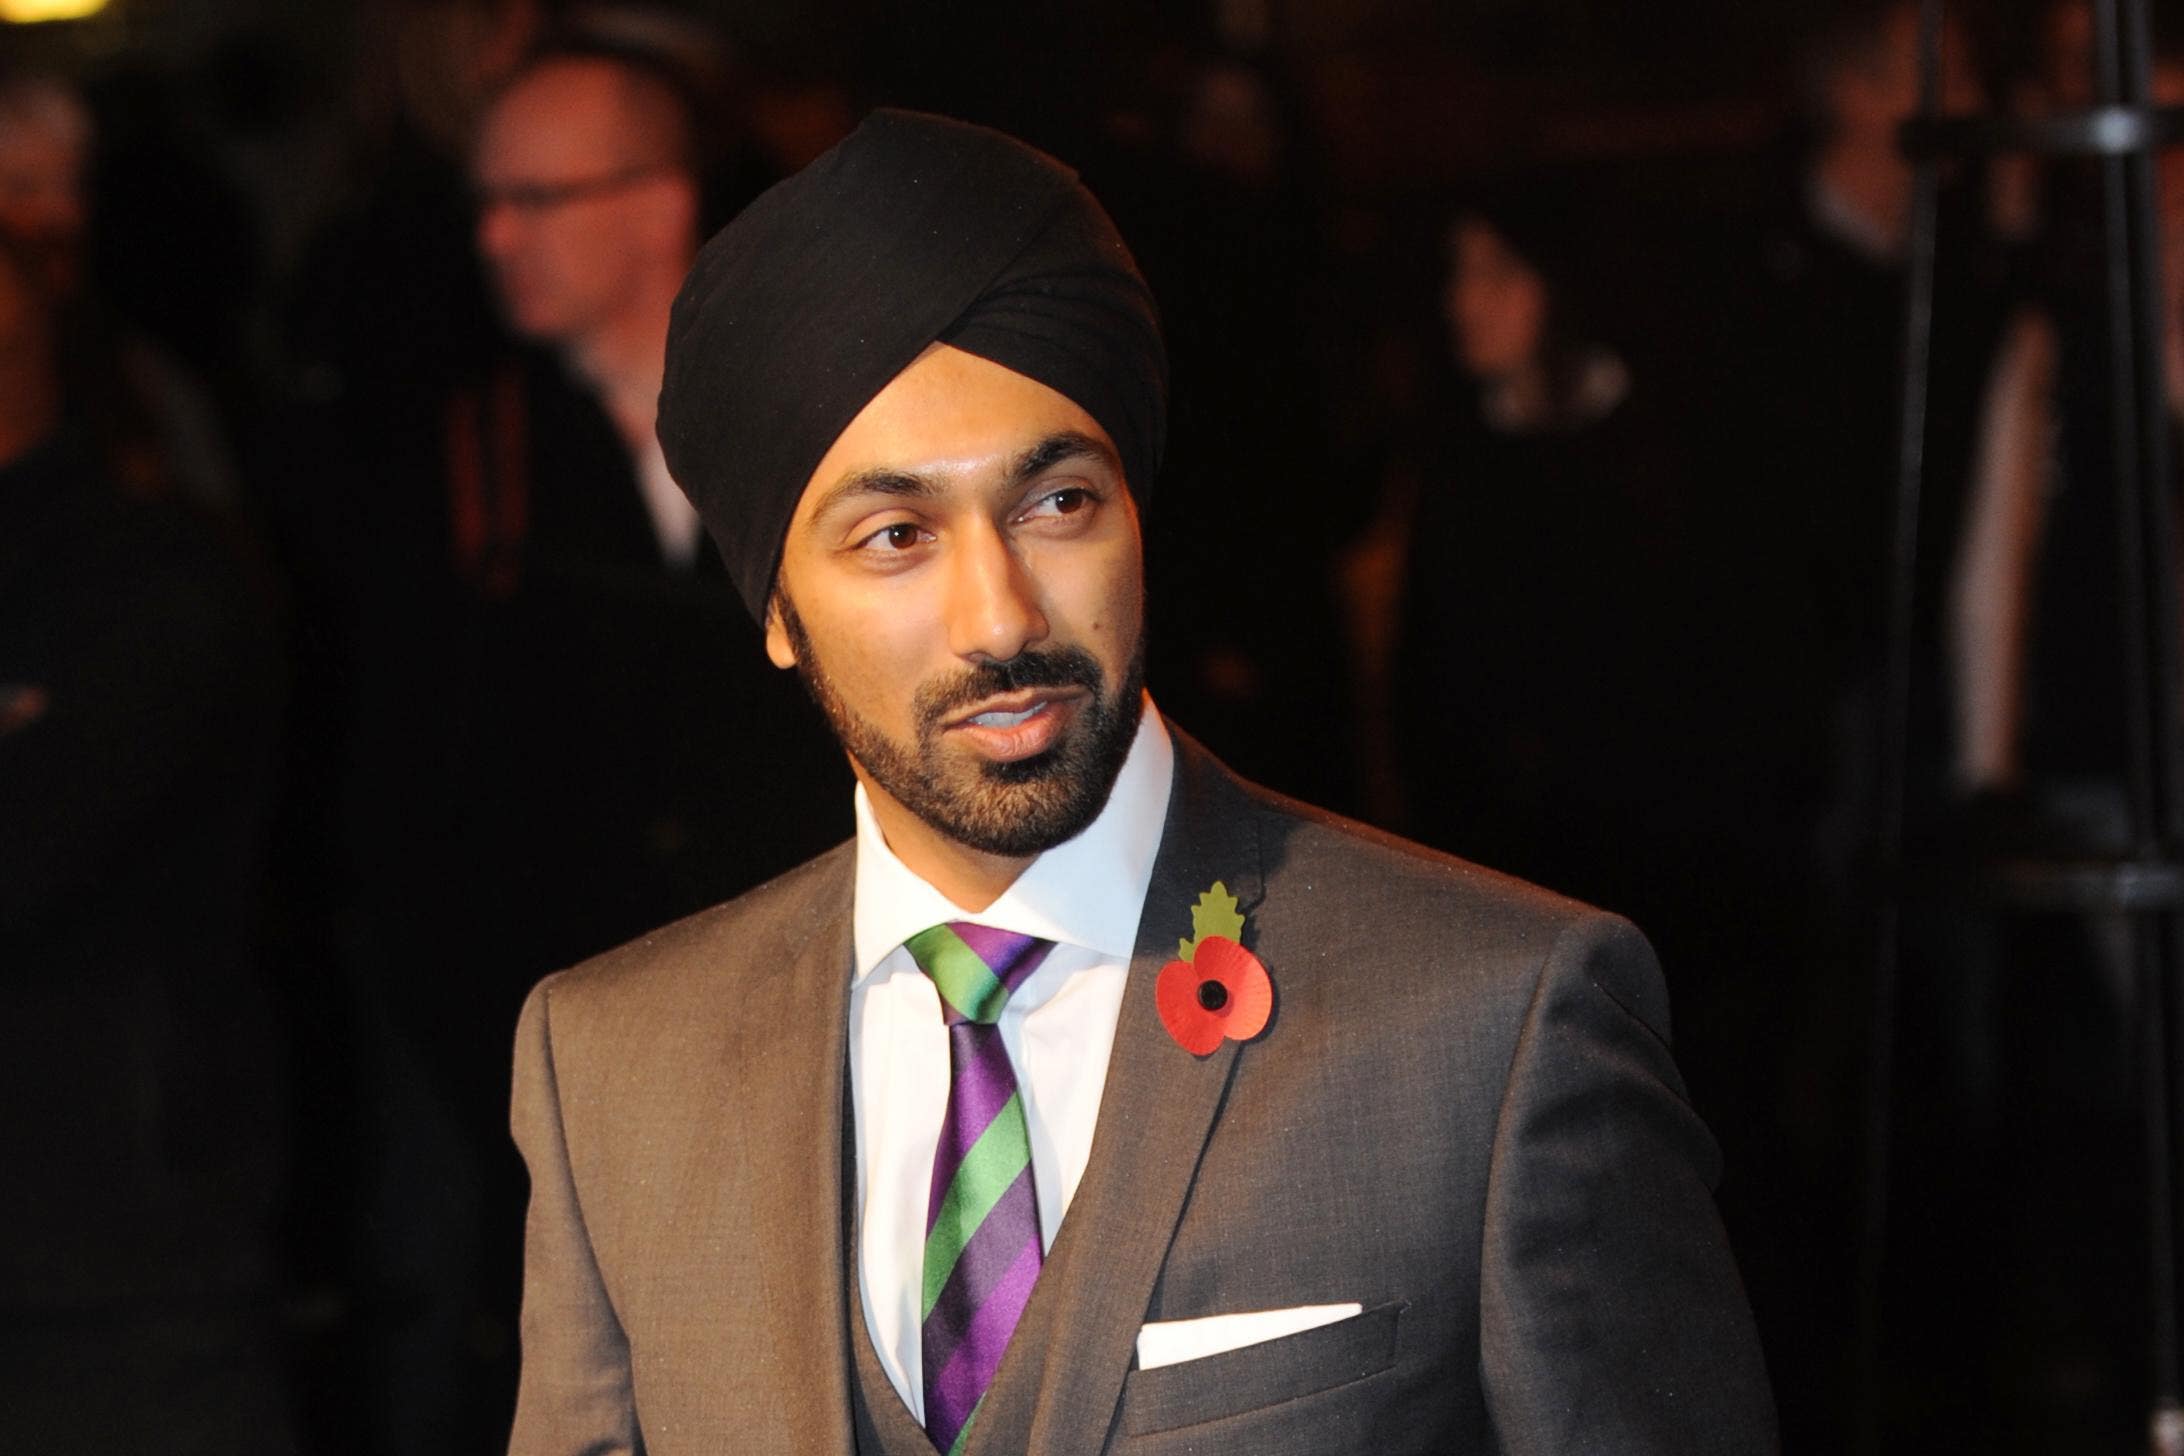 Lord Kulveer Ranger apologised after a drunken outburst in one of Parliament’s bars